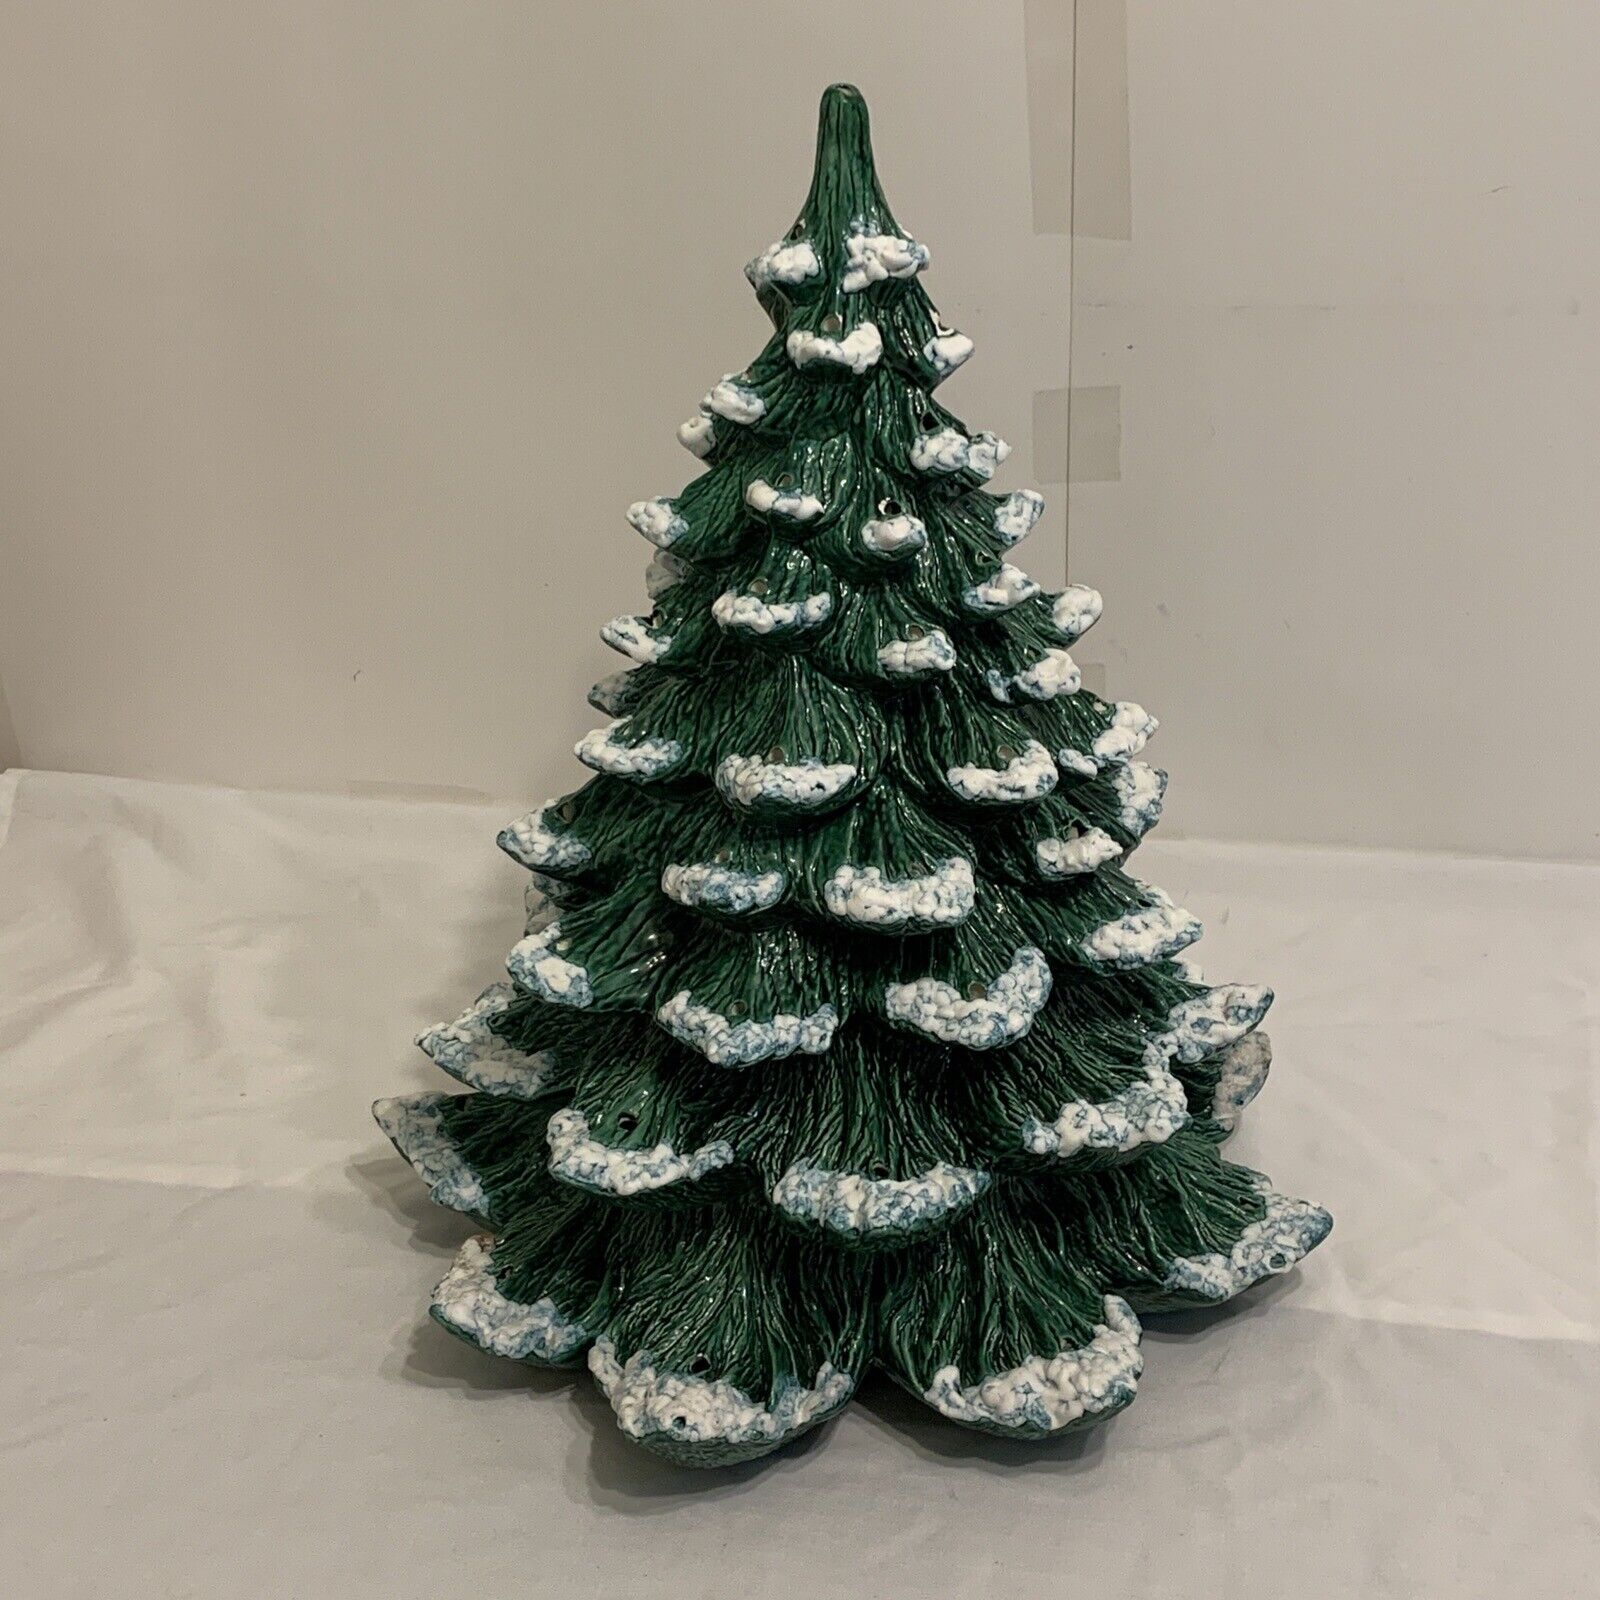 1979 Vintage Rare Nowell’s Mold Large Ceramic Christmas Tree With Snow Flakes